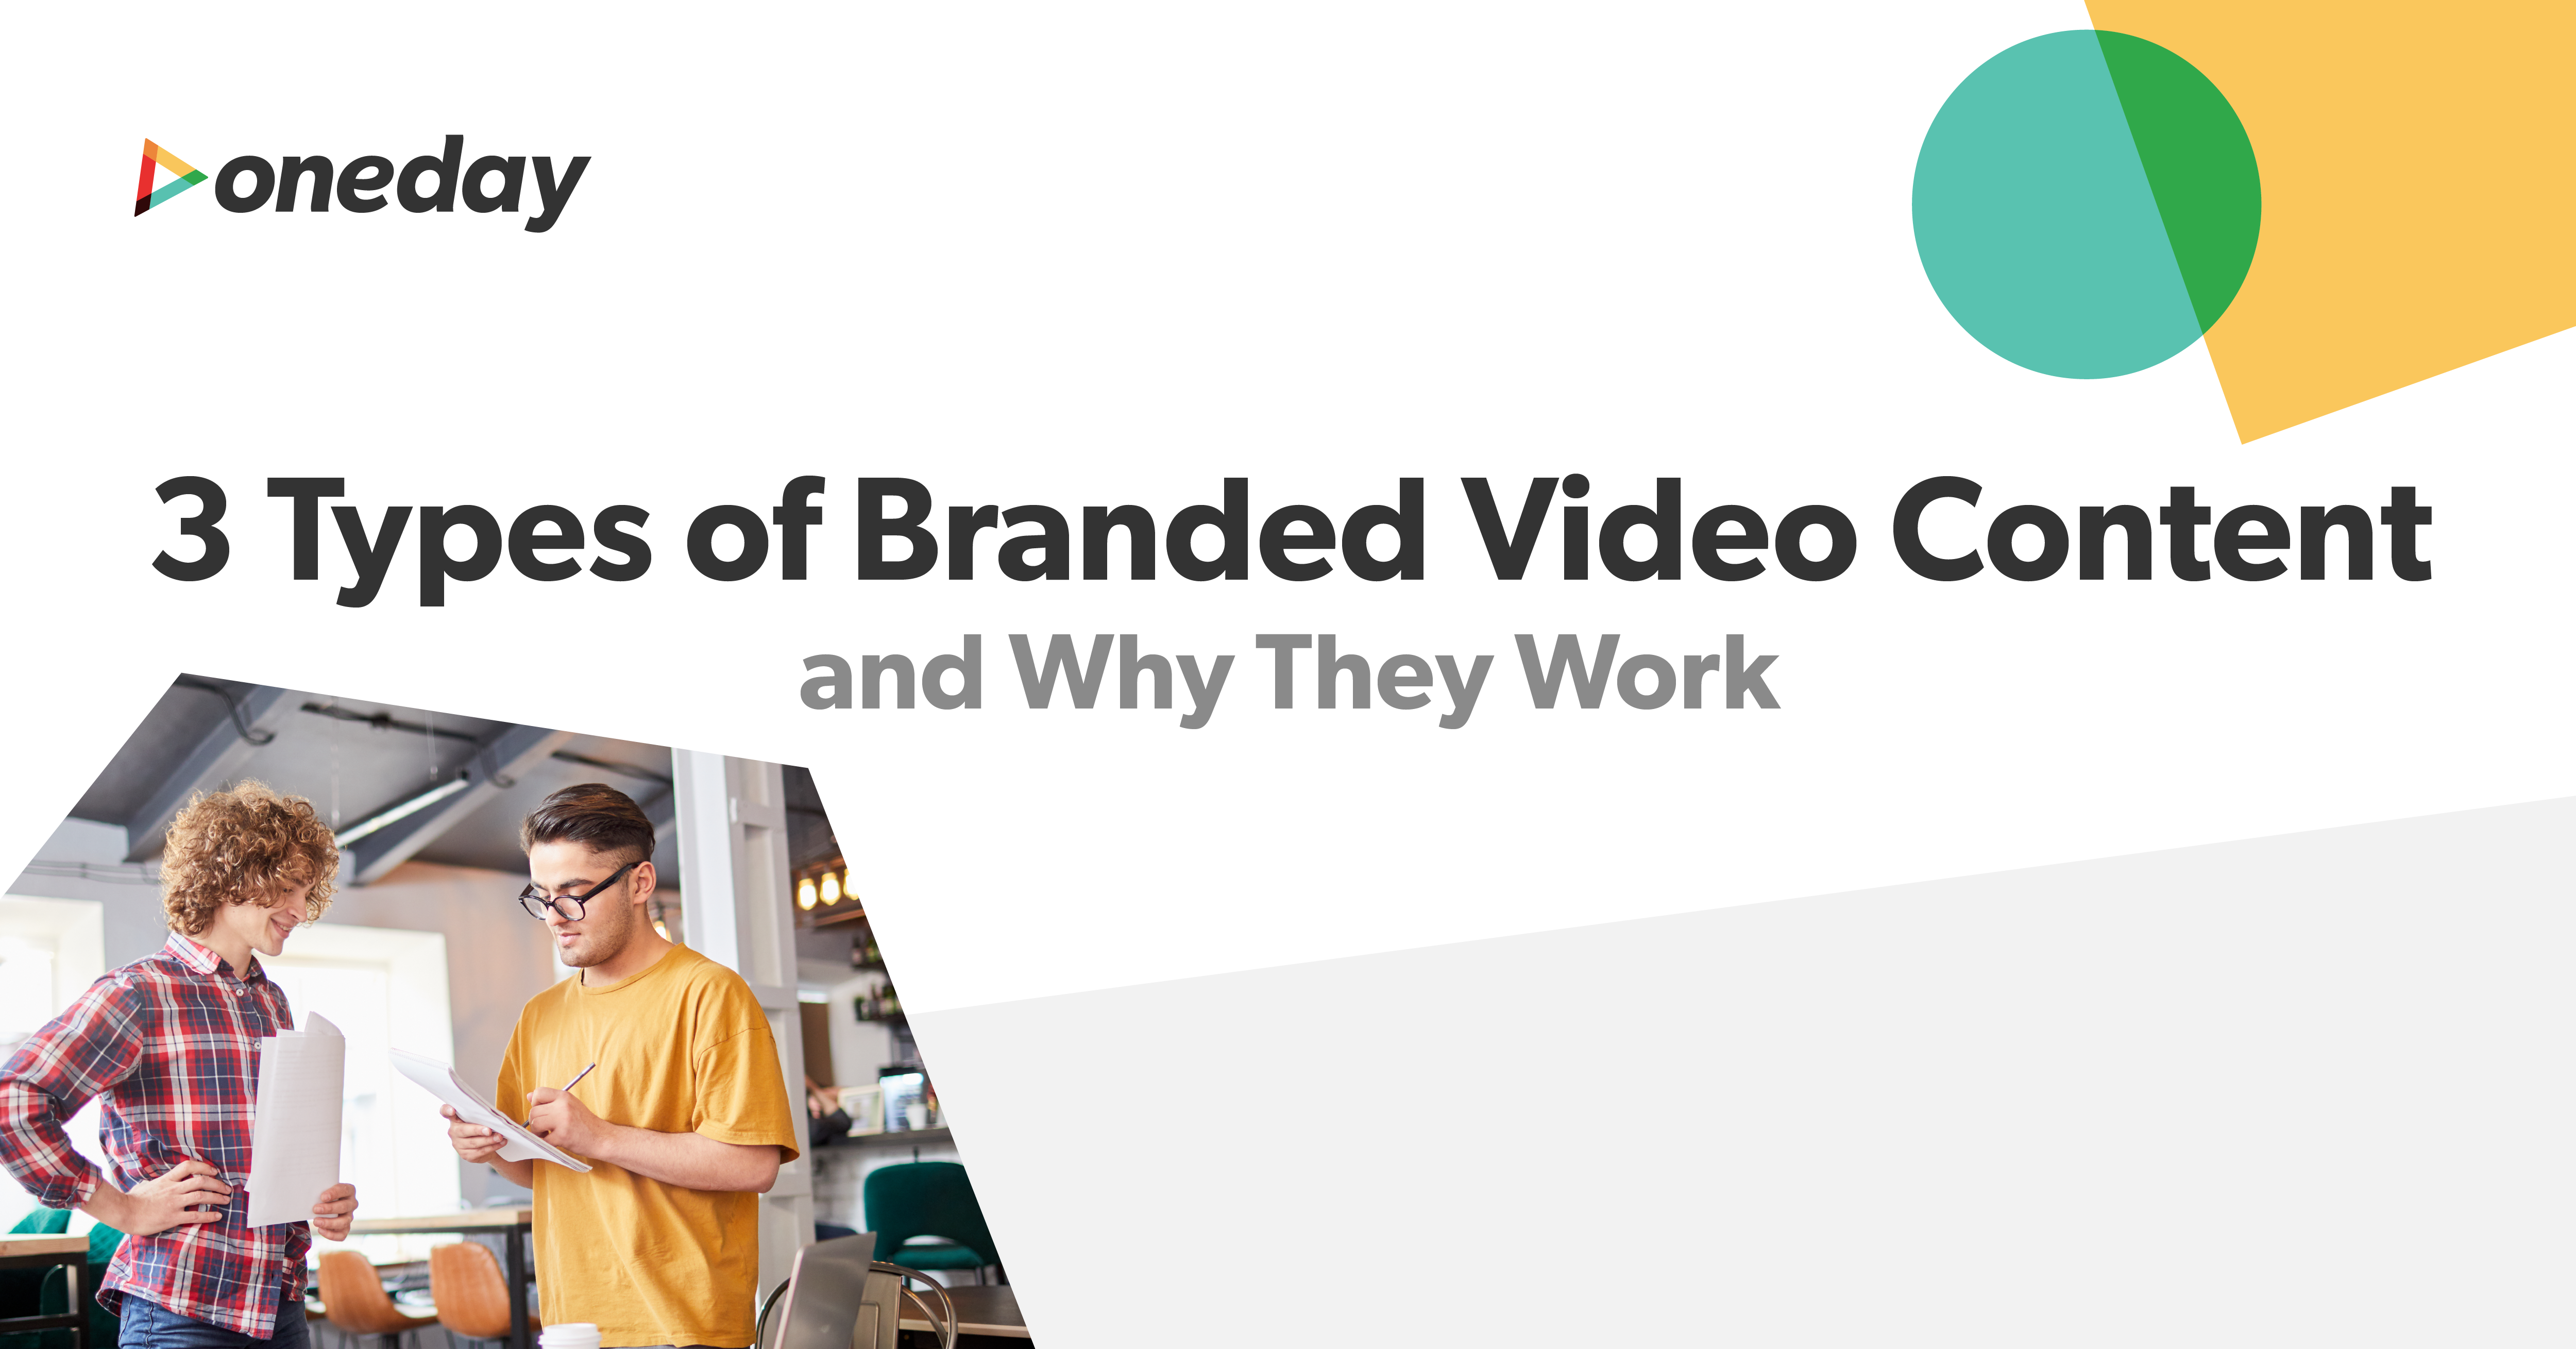 A look at three specific types of video content that can reinvigorate your organization’s branding and help build trust and recognition within your audience.